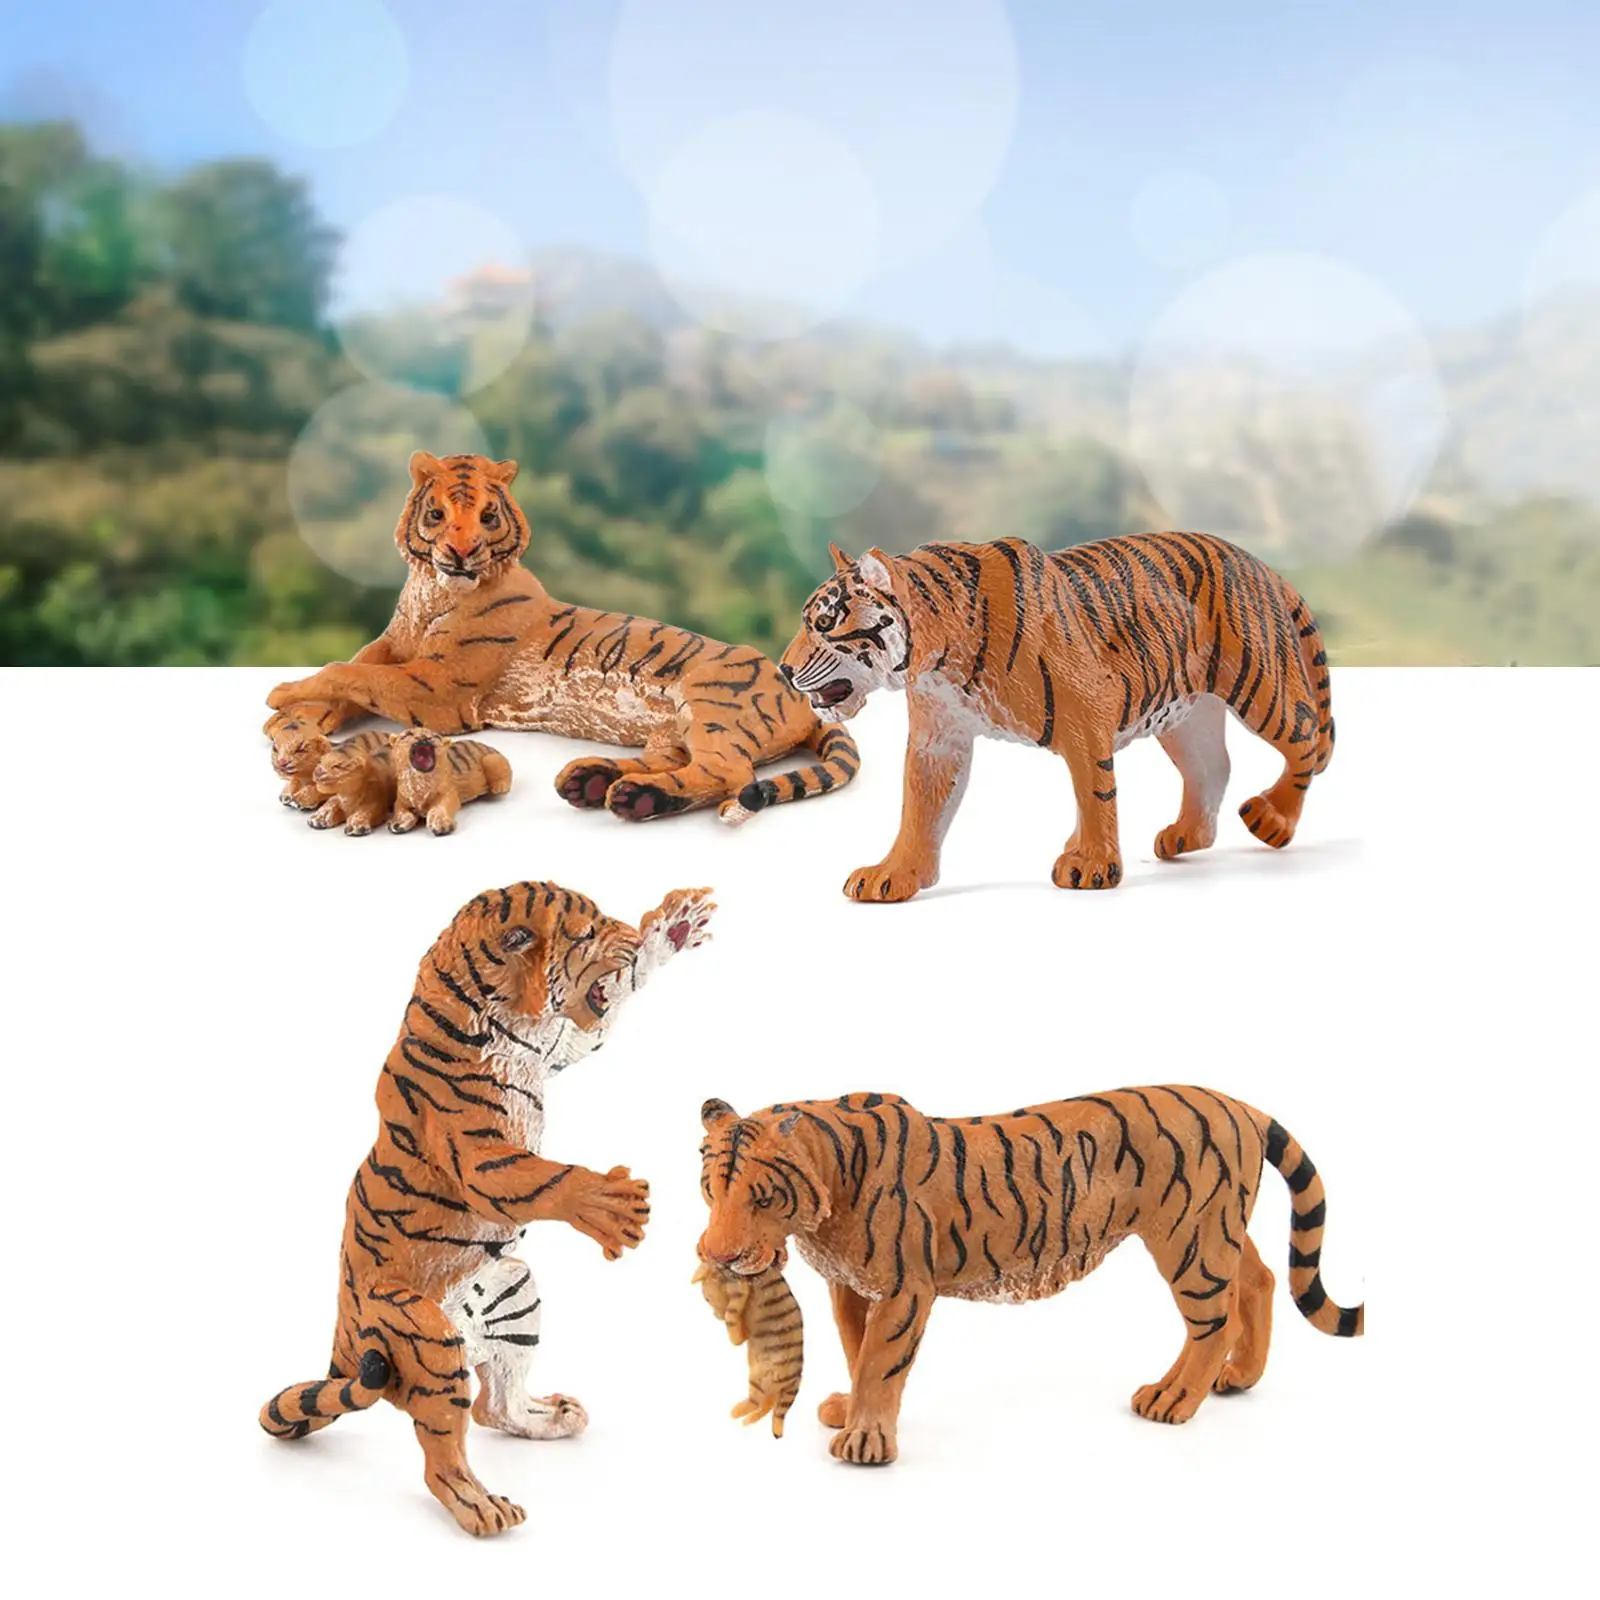 Realistic Tiger Figurines Forest Animals Toy for Shelf Living Room Decor